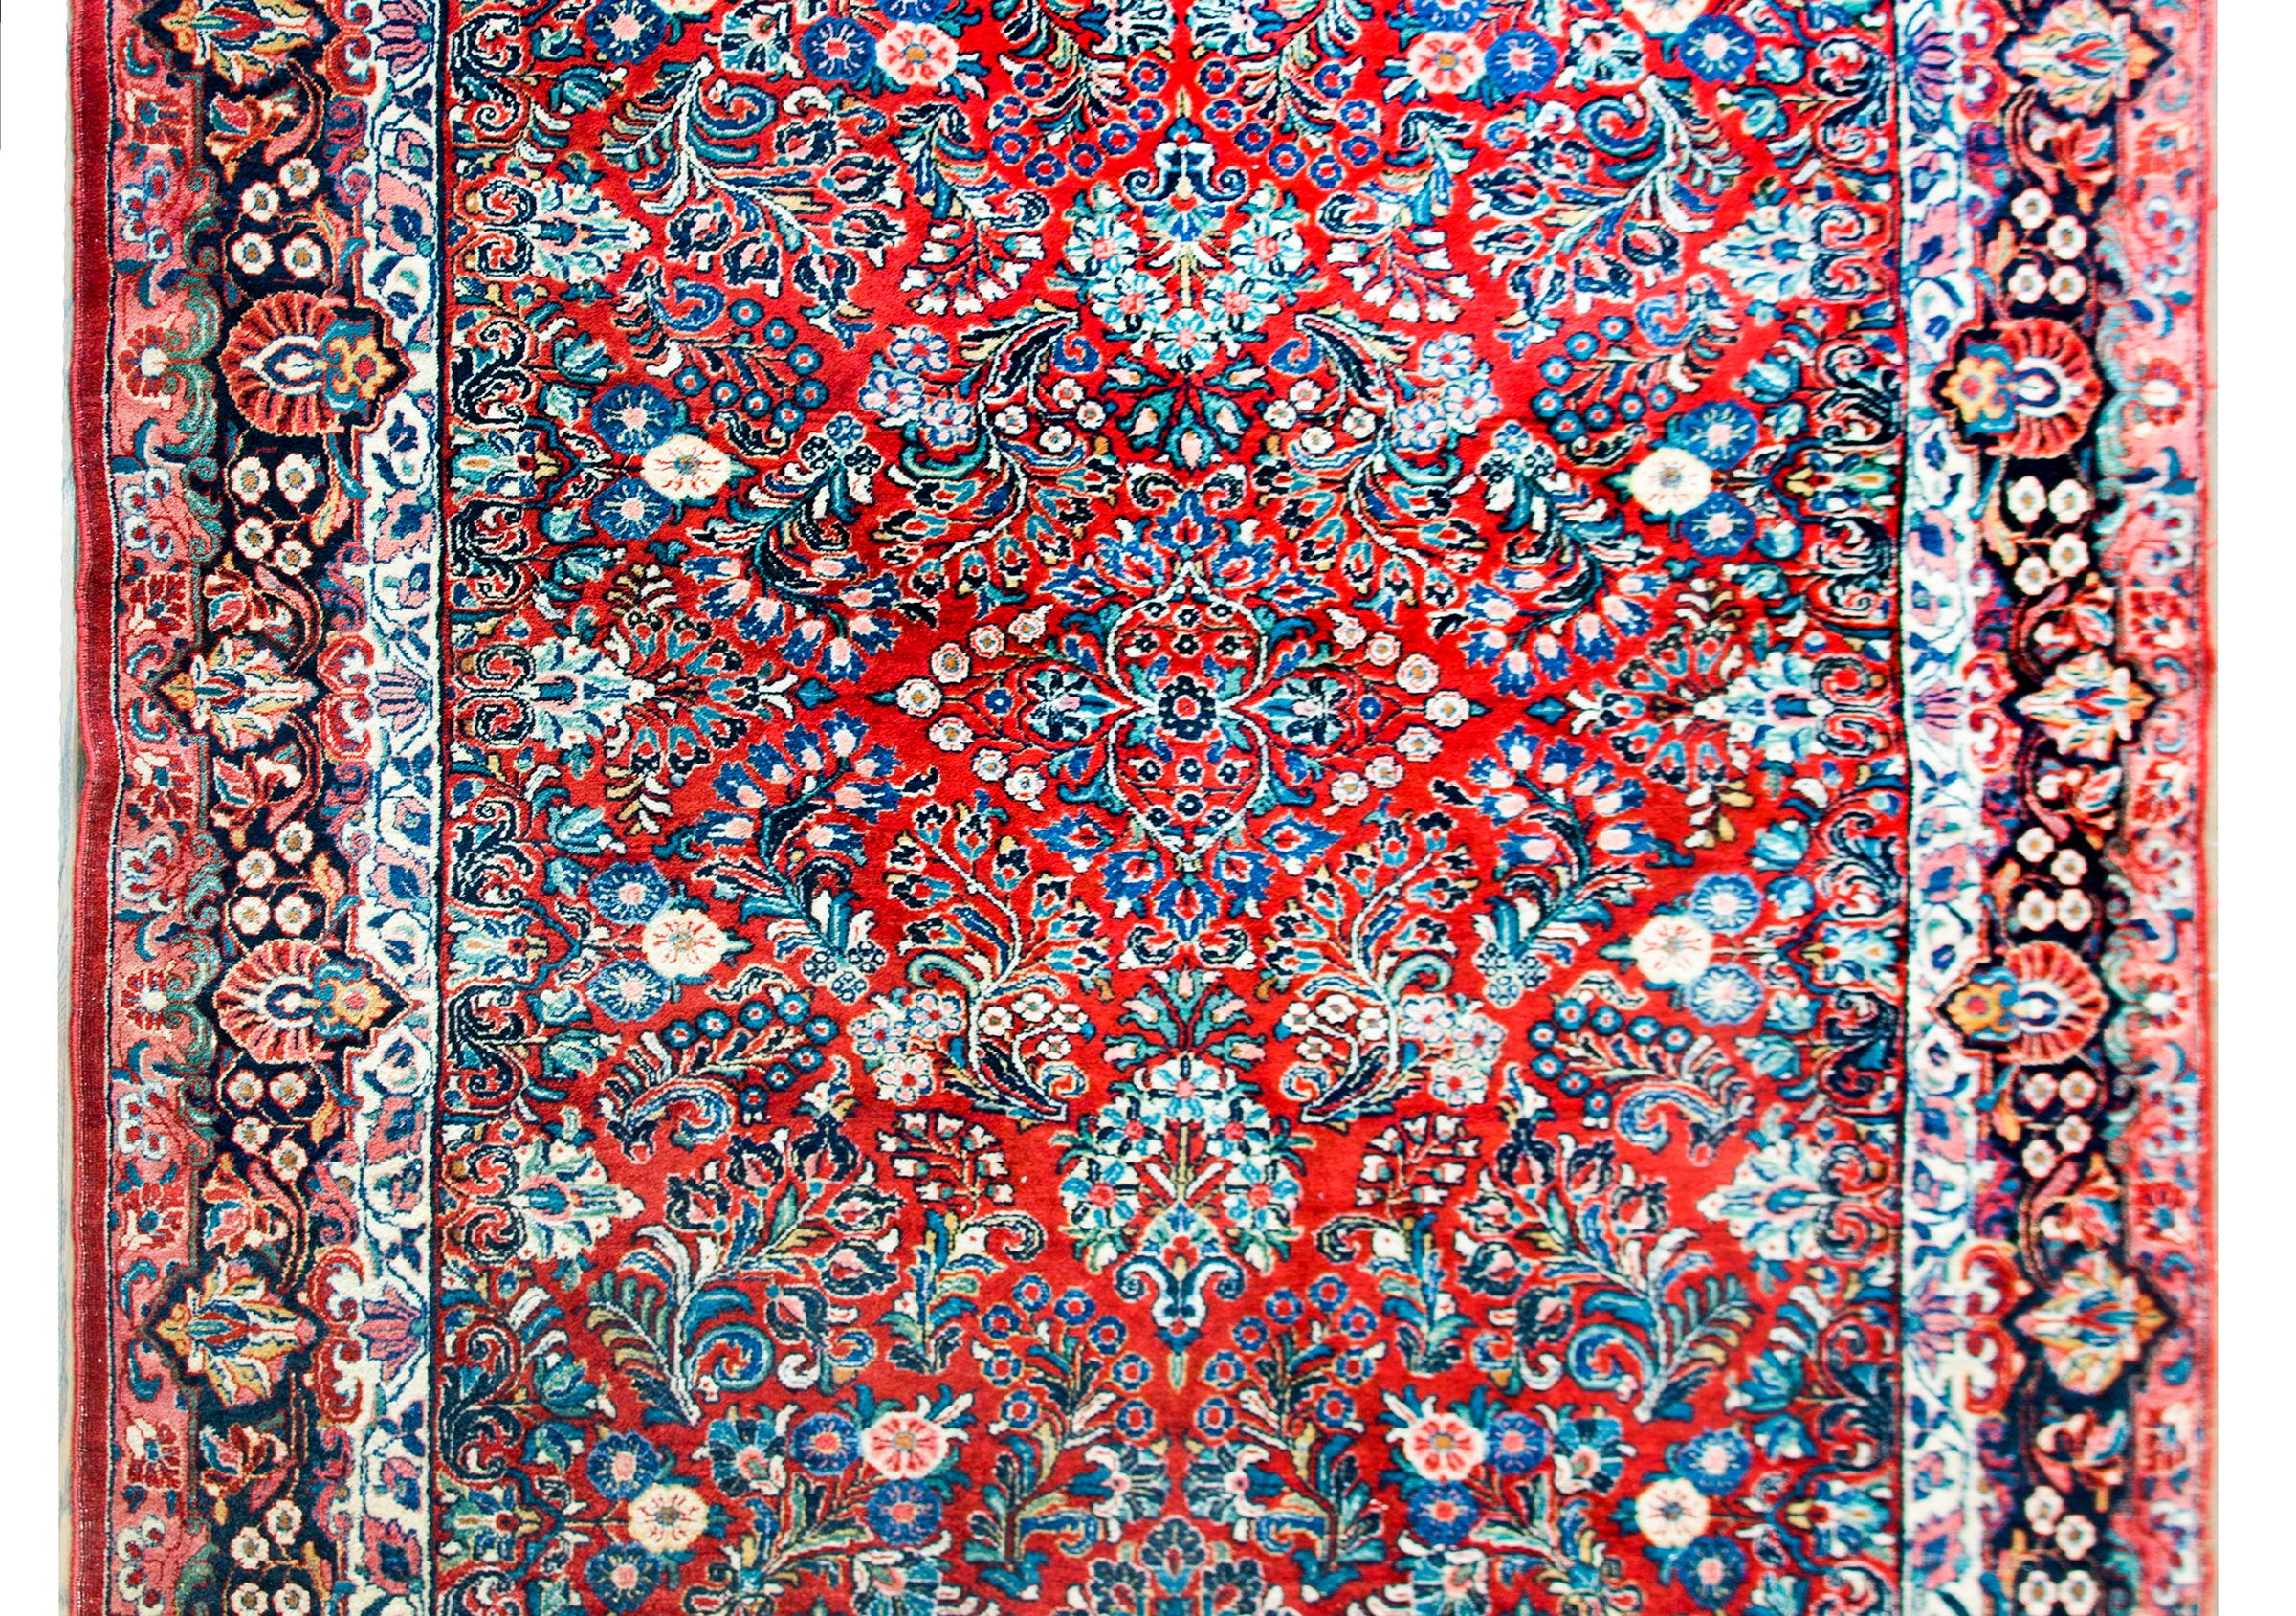 A beautiful early 20th century Persian Sarouk rug with a large-scale mirrored floral pattern containing myriad floral clusters all woven in light and dark indigo, pink, white, and yellow set against a brilliant crimson background, and surrounded by